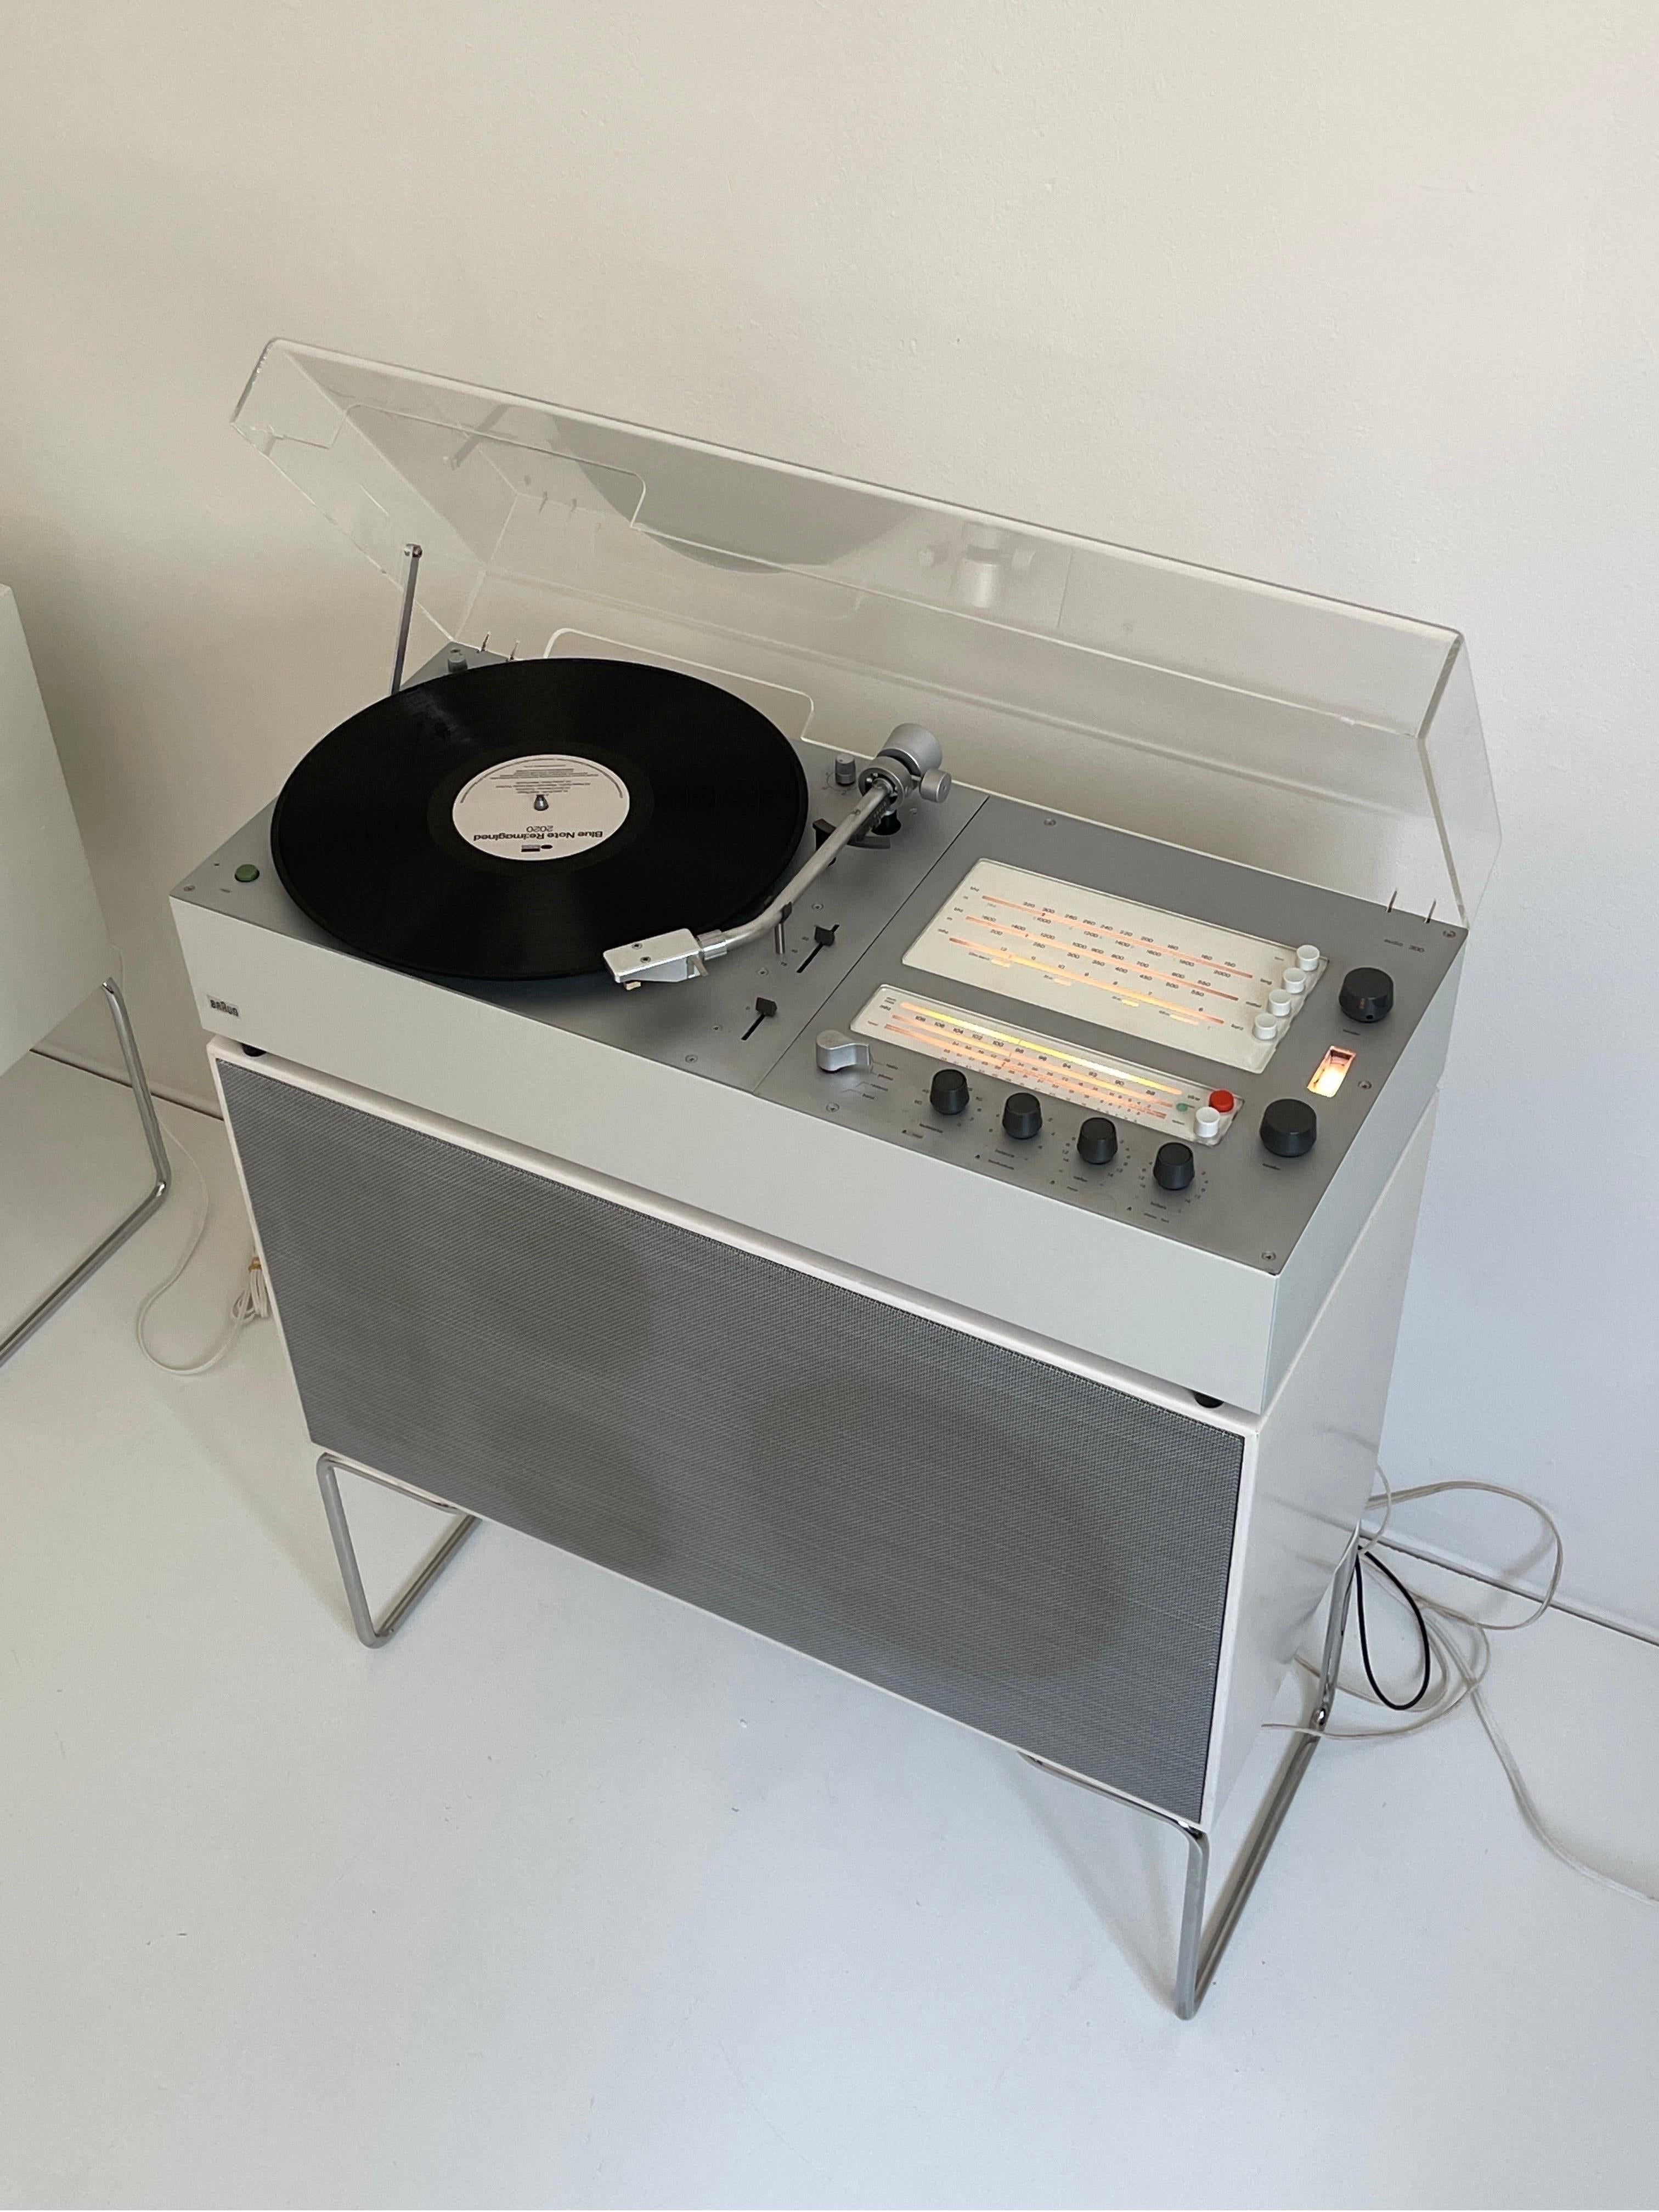 Braun Audio 310 and L50 floor speaker designed by Dieter Rams, 1960's/70's. Equip with AM/FM radio and record player. Fully functional and has been serviced by a technician.